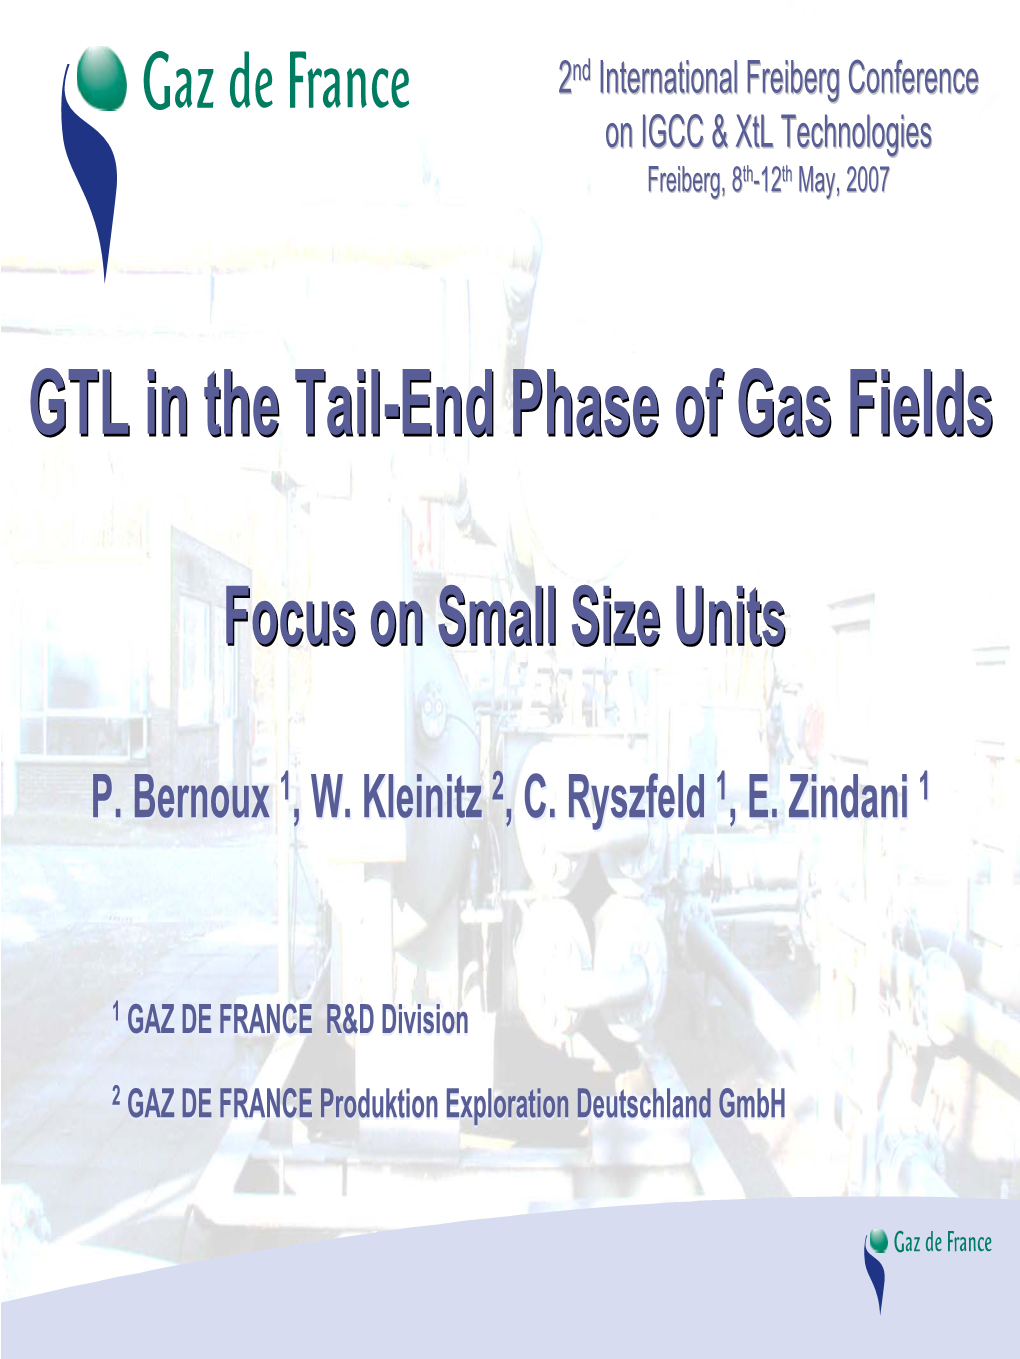 GTL in the Tail-End Phase of Gas Fields Focus on Small Size Units 1Bernoux, P